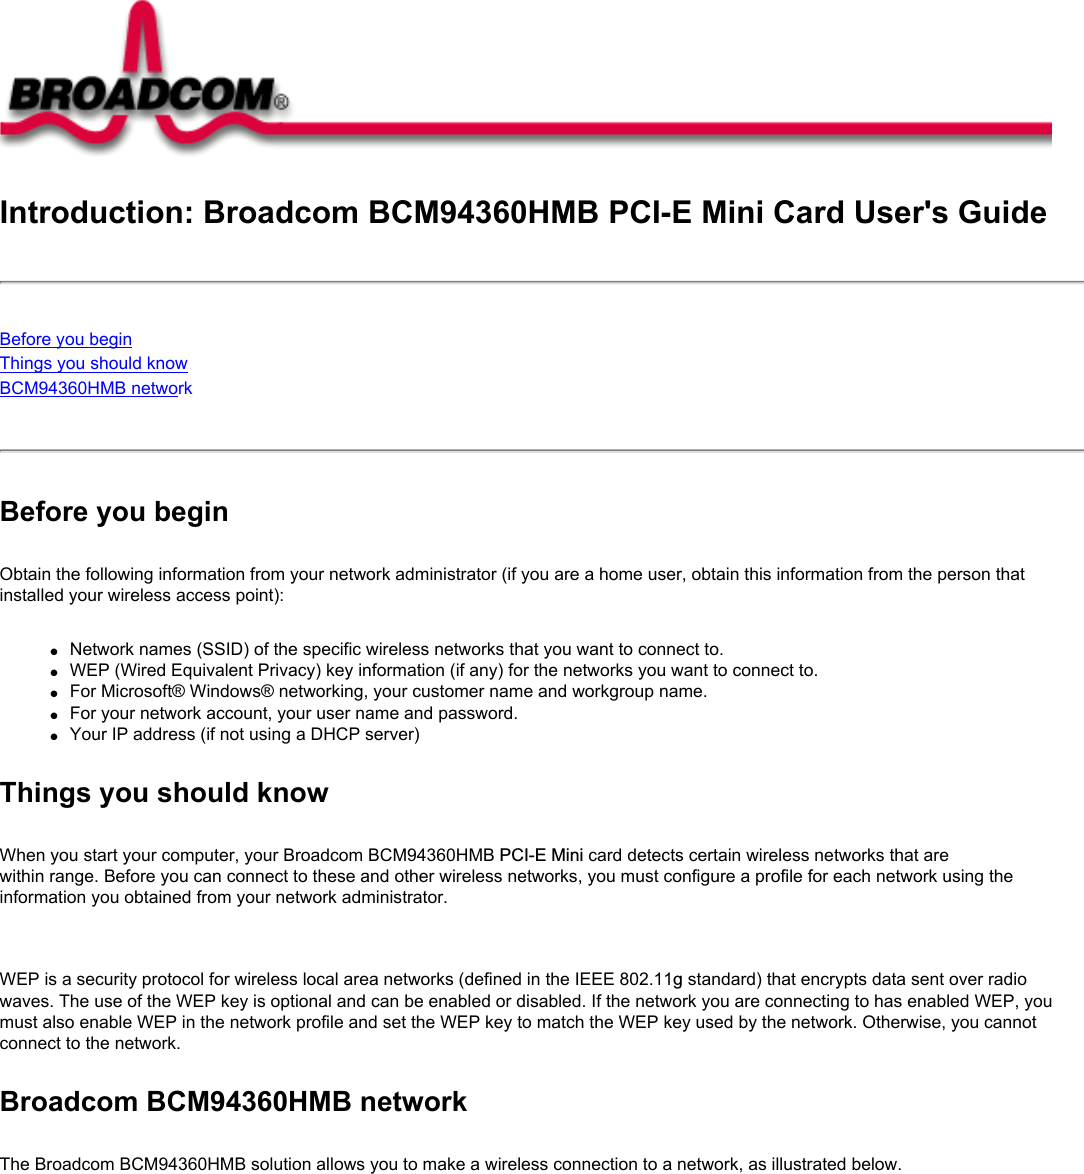 Introduction: Broadcom BCM94360HMB PCI-E Mini Card User&apos;s GuideBefore you beginThings you should knowBCM94360HMB network Before you beginObtain the following information from your network administrator (if you are a home user, obtain this information from the person that installed your wireless access point):●     Network names (SSID) of the specific wireless networks that you want to connect to.●     WEP (Wired Equivalent Privacy) key information (if any) for the networks you want to connect to.●     For Microsoft® Windows® networking, your customer name and workgroup name.●     For your network account, your user name and password.●     Your IP address (if not using a DHCP server)Things you should knowWhen you start your computer, your Broadcom BCM94360HMB PCI-E Mini card detects certain wireless networks that are within range. Before you can connect to these and other wireless networks, you must configure a profile for each network using the information you obtained from your network administrator.   WEP is a security protocol for wireless local area networks (defined in the IEEE 802.11g standard) that encrypts data sent over radio waves. The use of the WEP key is optional and can be enabled or disabled. If the network you are connecting to has enabled WEP, you must also enable WEP in the network profile and set the WEP key to match the WEP key used by the network. Otherwise, you cannot connect to the network.Broadcom BCM94360HMB networkThe Broadcom BCM94360HMB solution allows you to make a wireless connection to a network, as illustrated below.